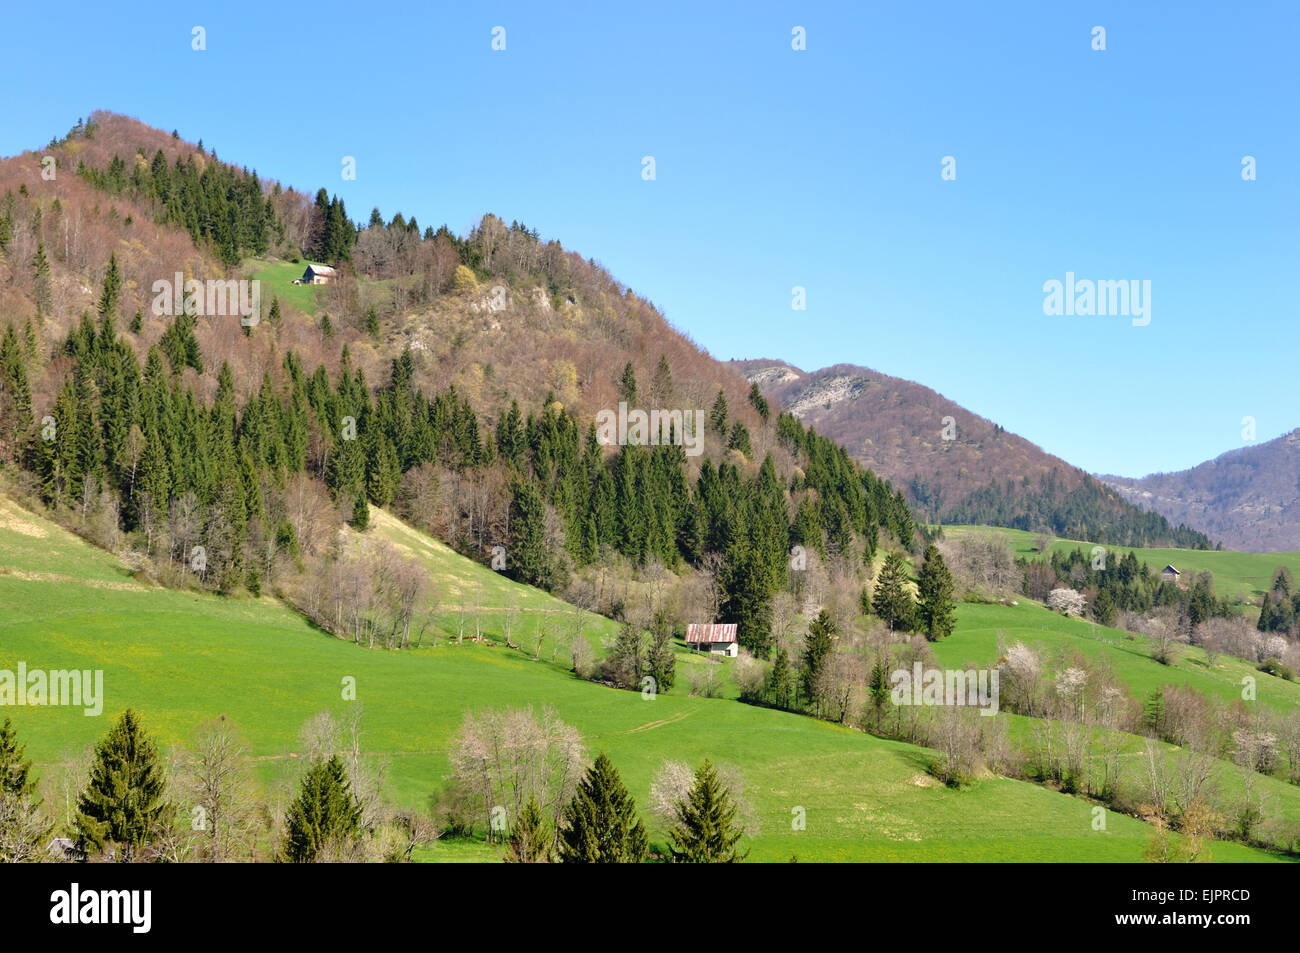 hills in greenery landscape with a house under blue sky Stock Photo